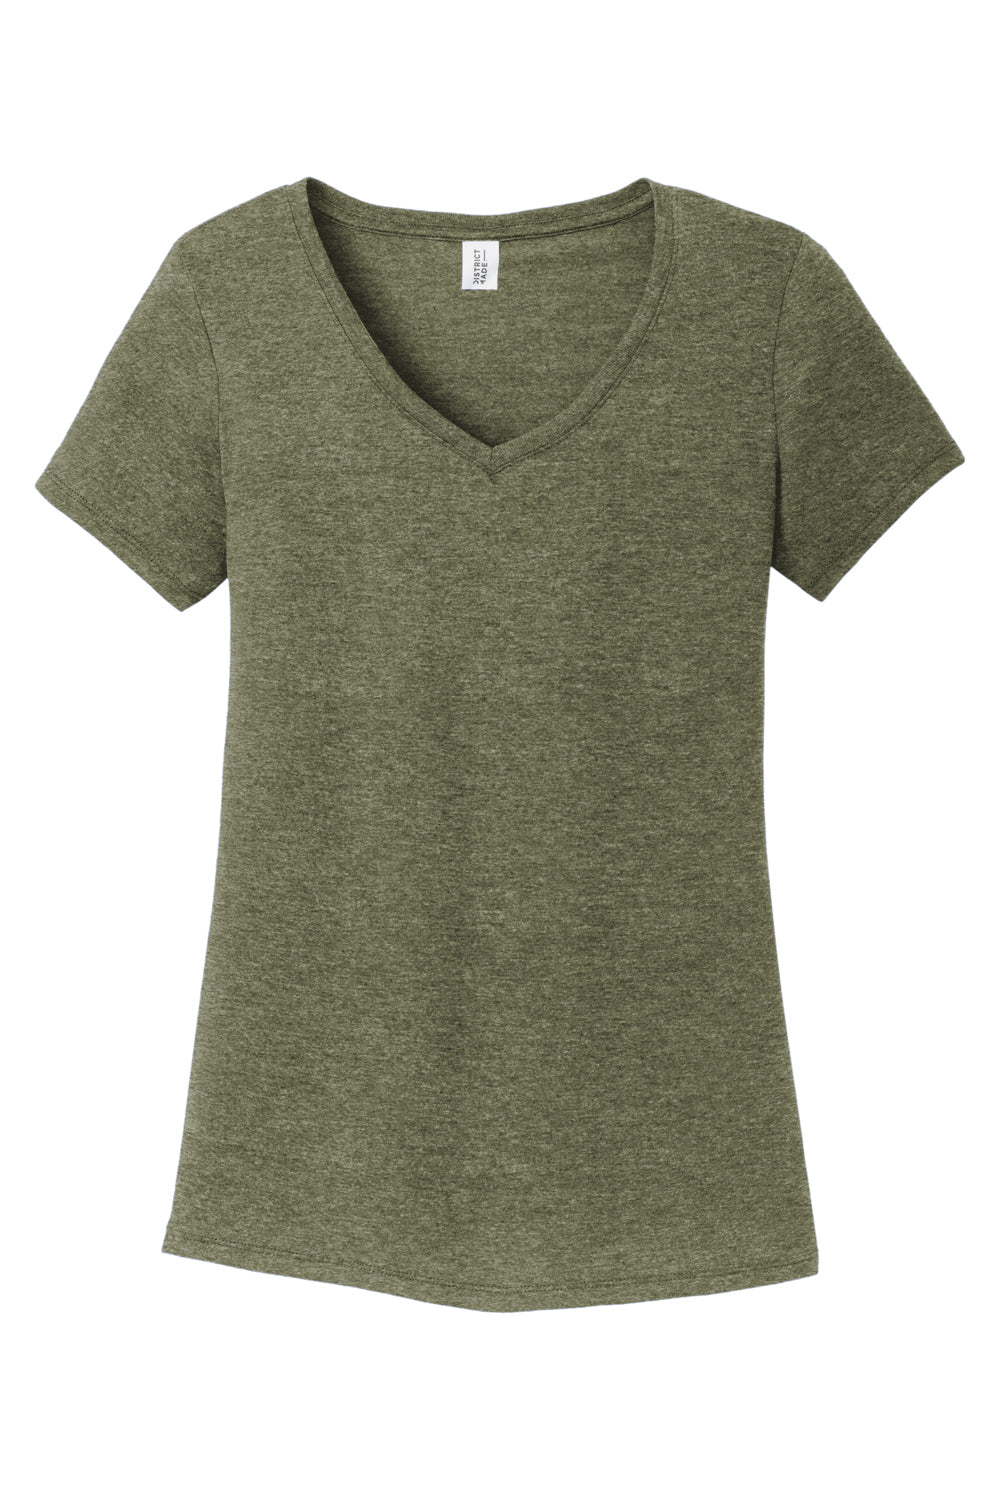 District DM1350L Womens Perfect Tri Short Sleeve V-Neck T-Shirt Military Green Frost Flat Front